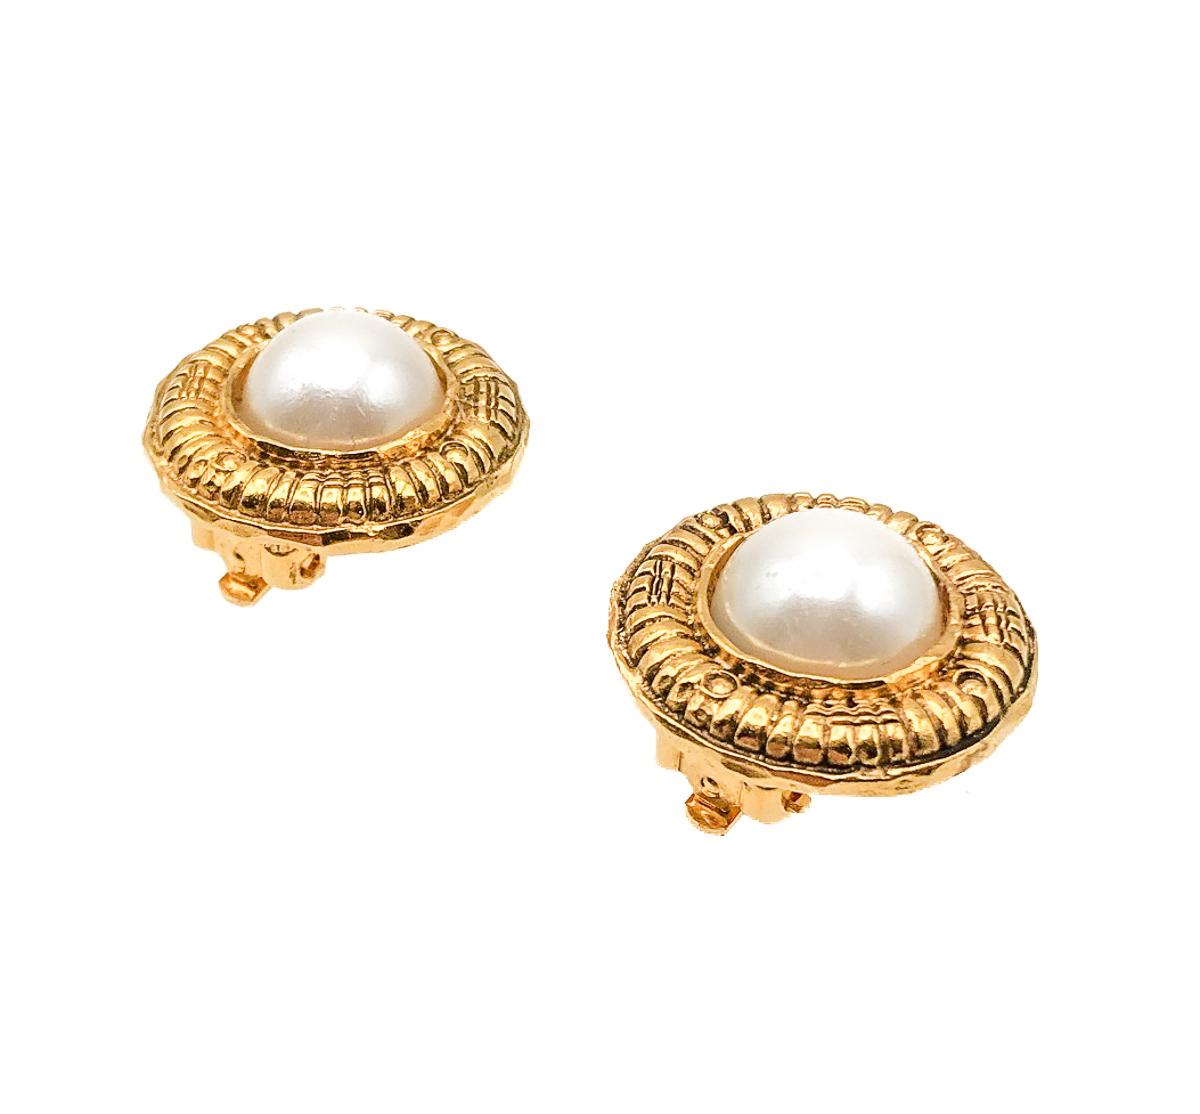 A beautiful pair of Vintage Chanel Pearl Earrings from the late 1970s, early 1980s. Celebrating one of the most iconic codes of Coco's House; pearls. Featuring an etruscan style mount for that added touch of glamour and intrigue. 

Since 1910 when